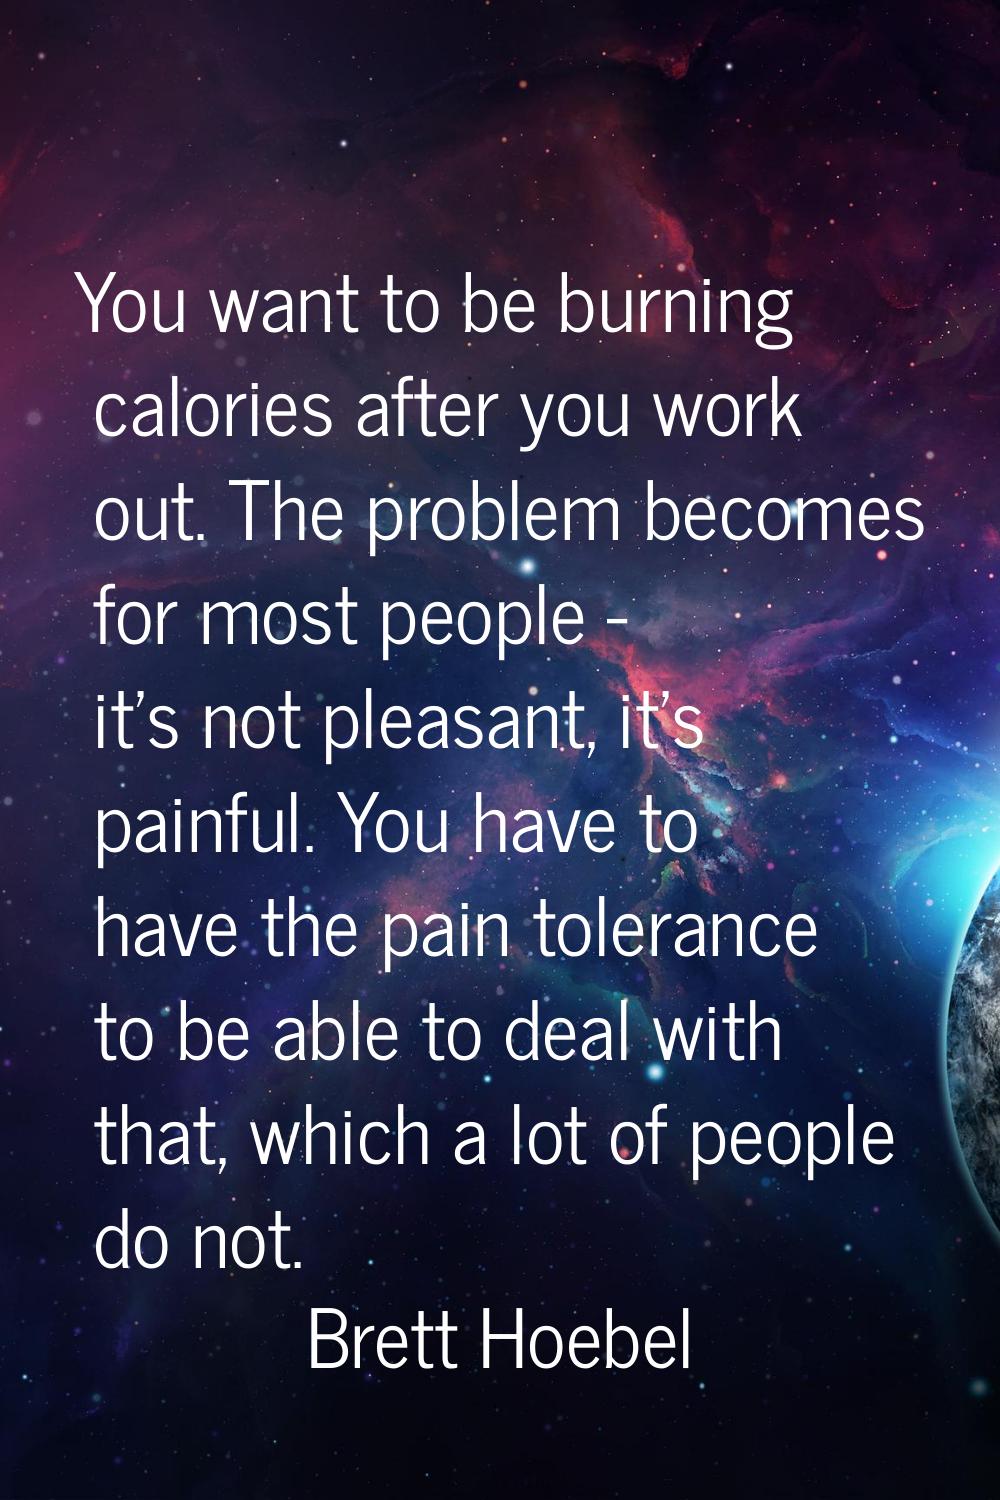 You want to be burning calories after you work out. The problem becomes for most people - it's not 